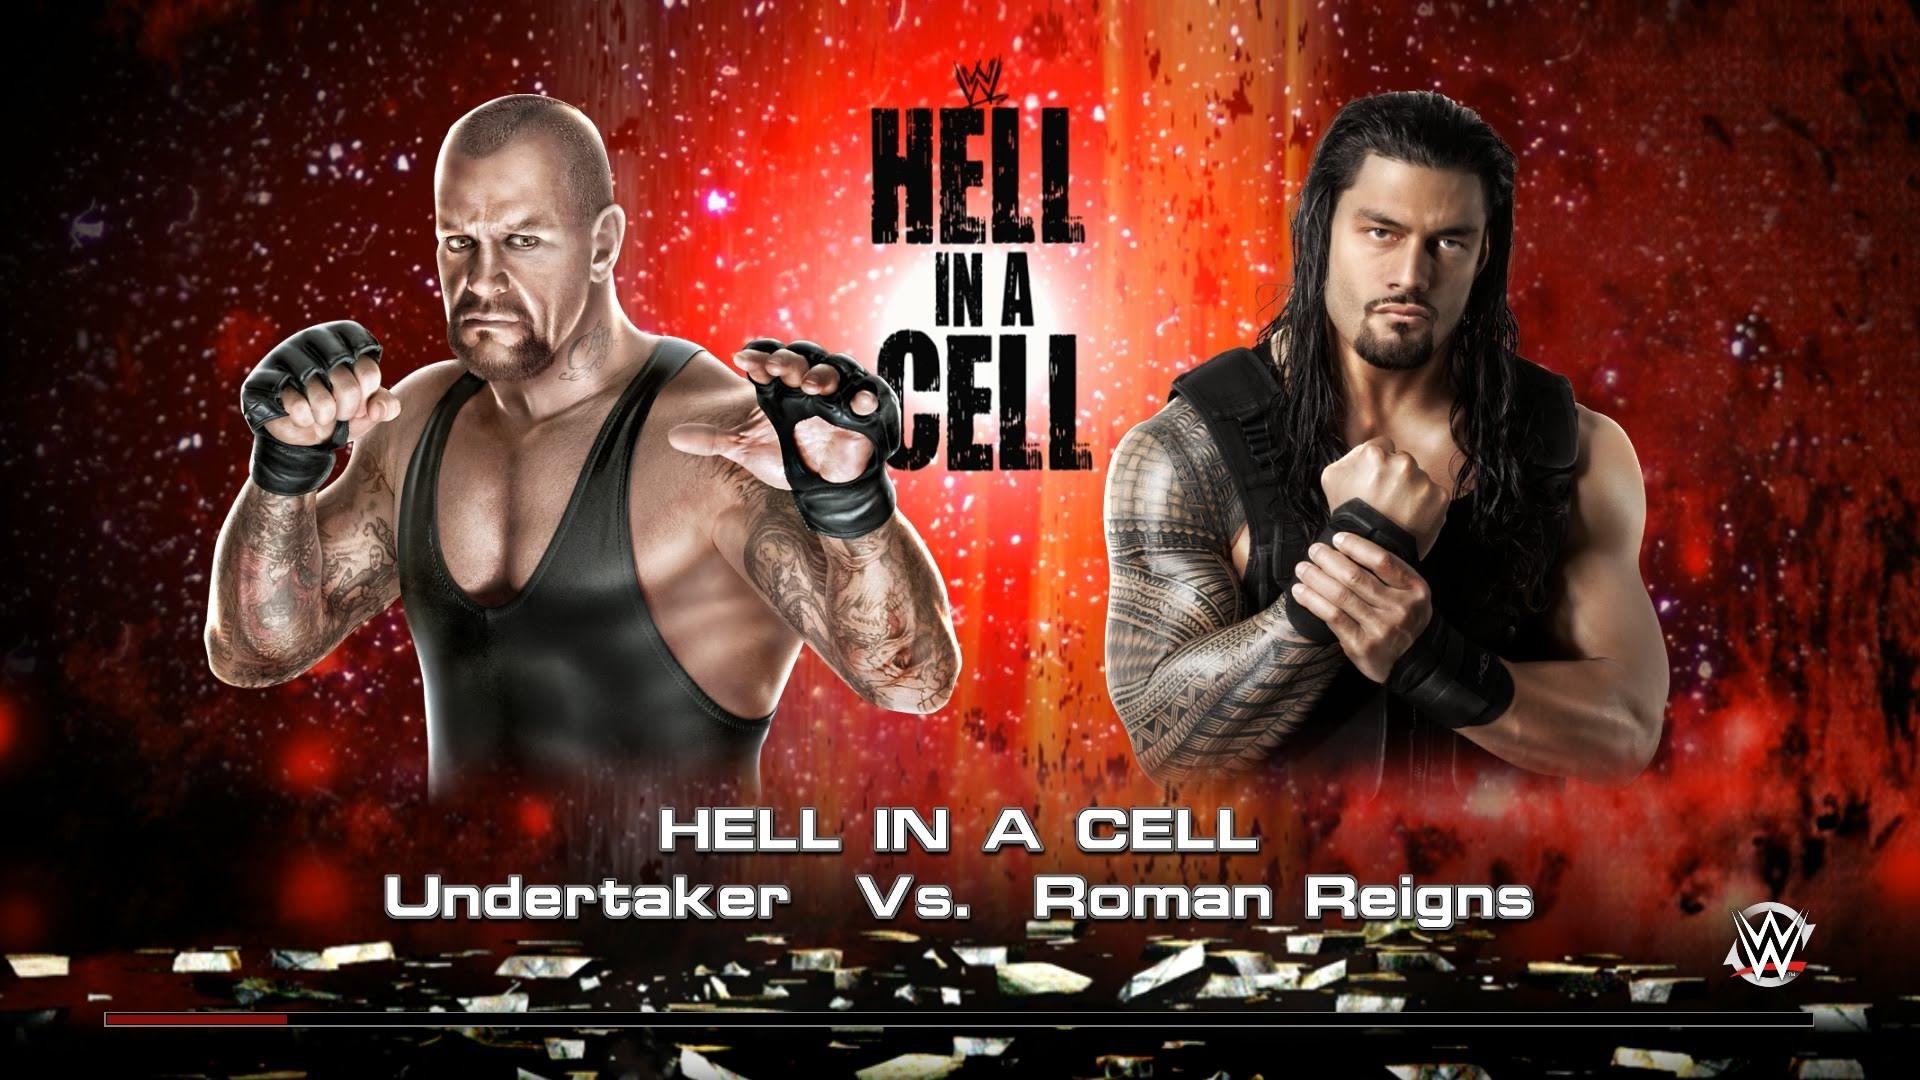 WWE Hell in a Cell FREE Preview Party. FREE